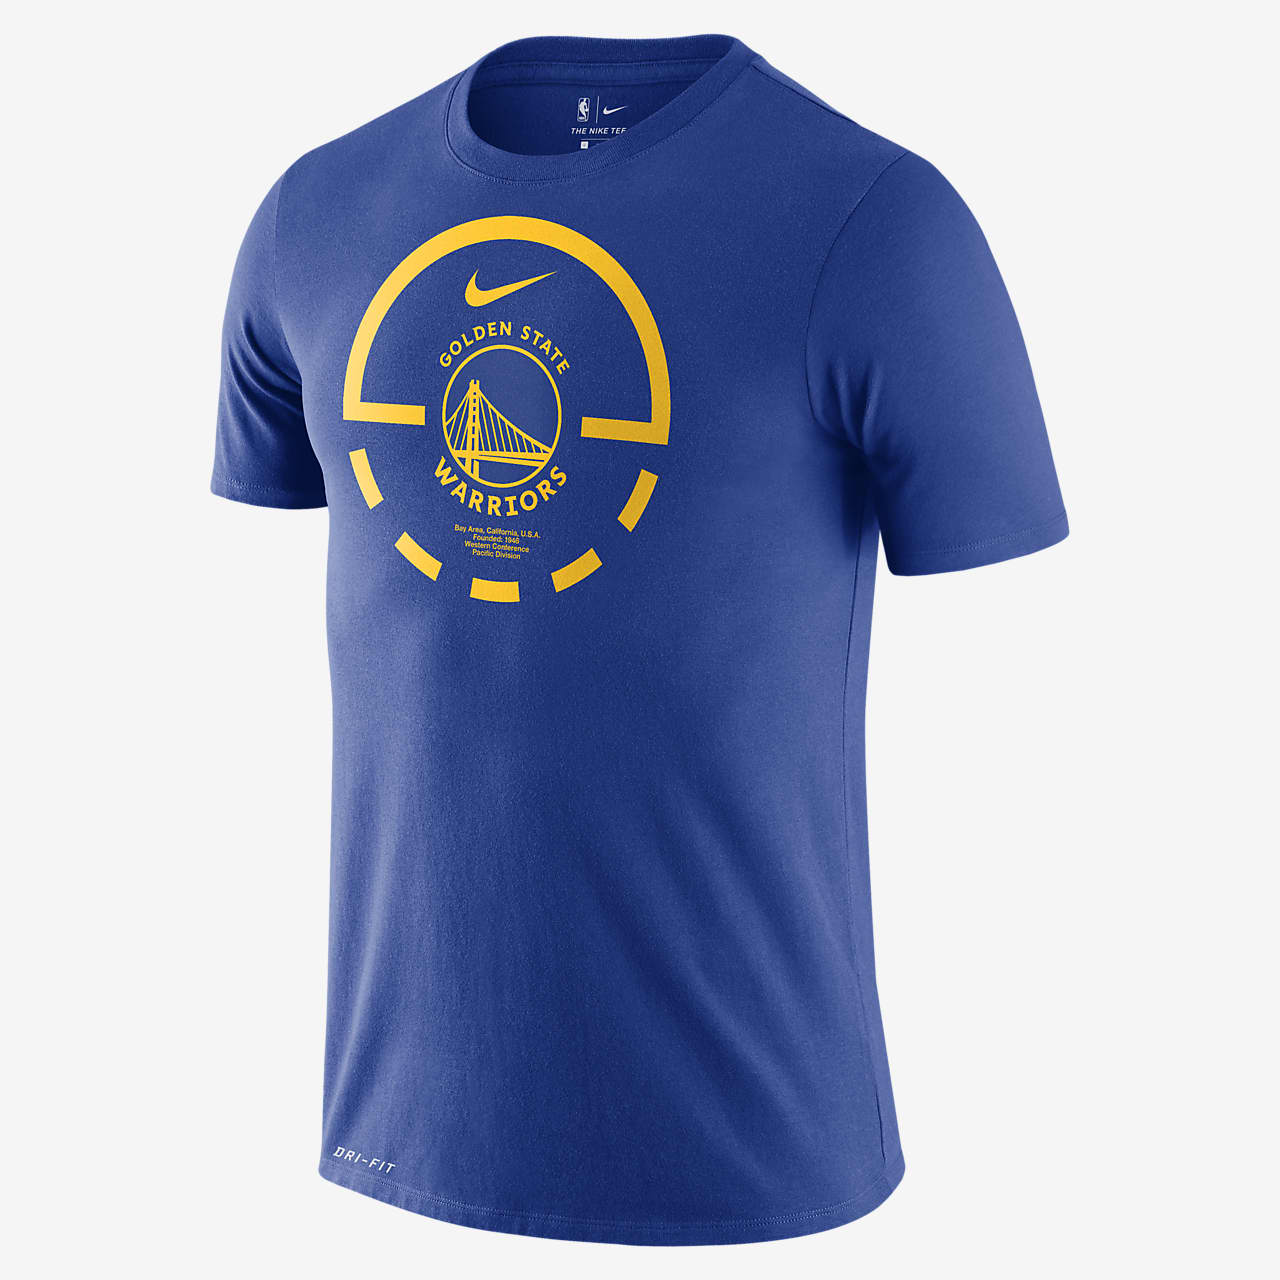 Titan 22 - Nike Dry - Golden State Warriors Tee Php 1,195